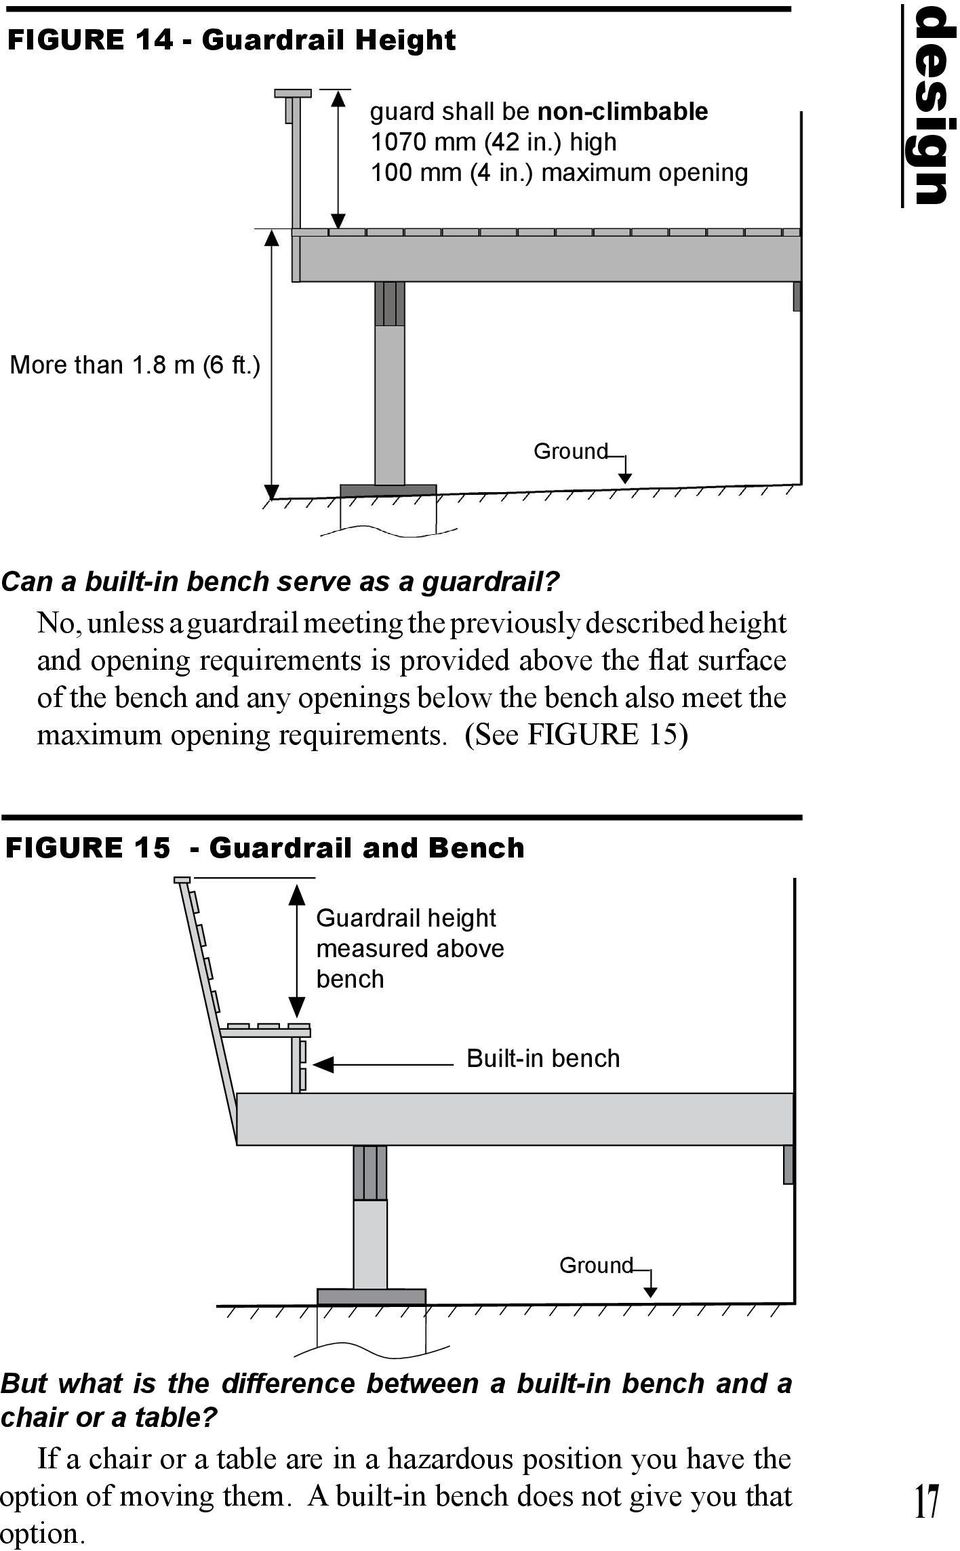 No, unless a guardrail meeting the previously described height and opening requirements is provided above the flat surface of the bench and any openings below the bench also meet